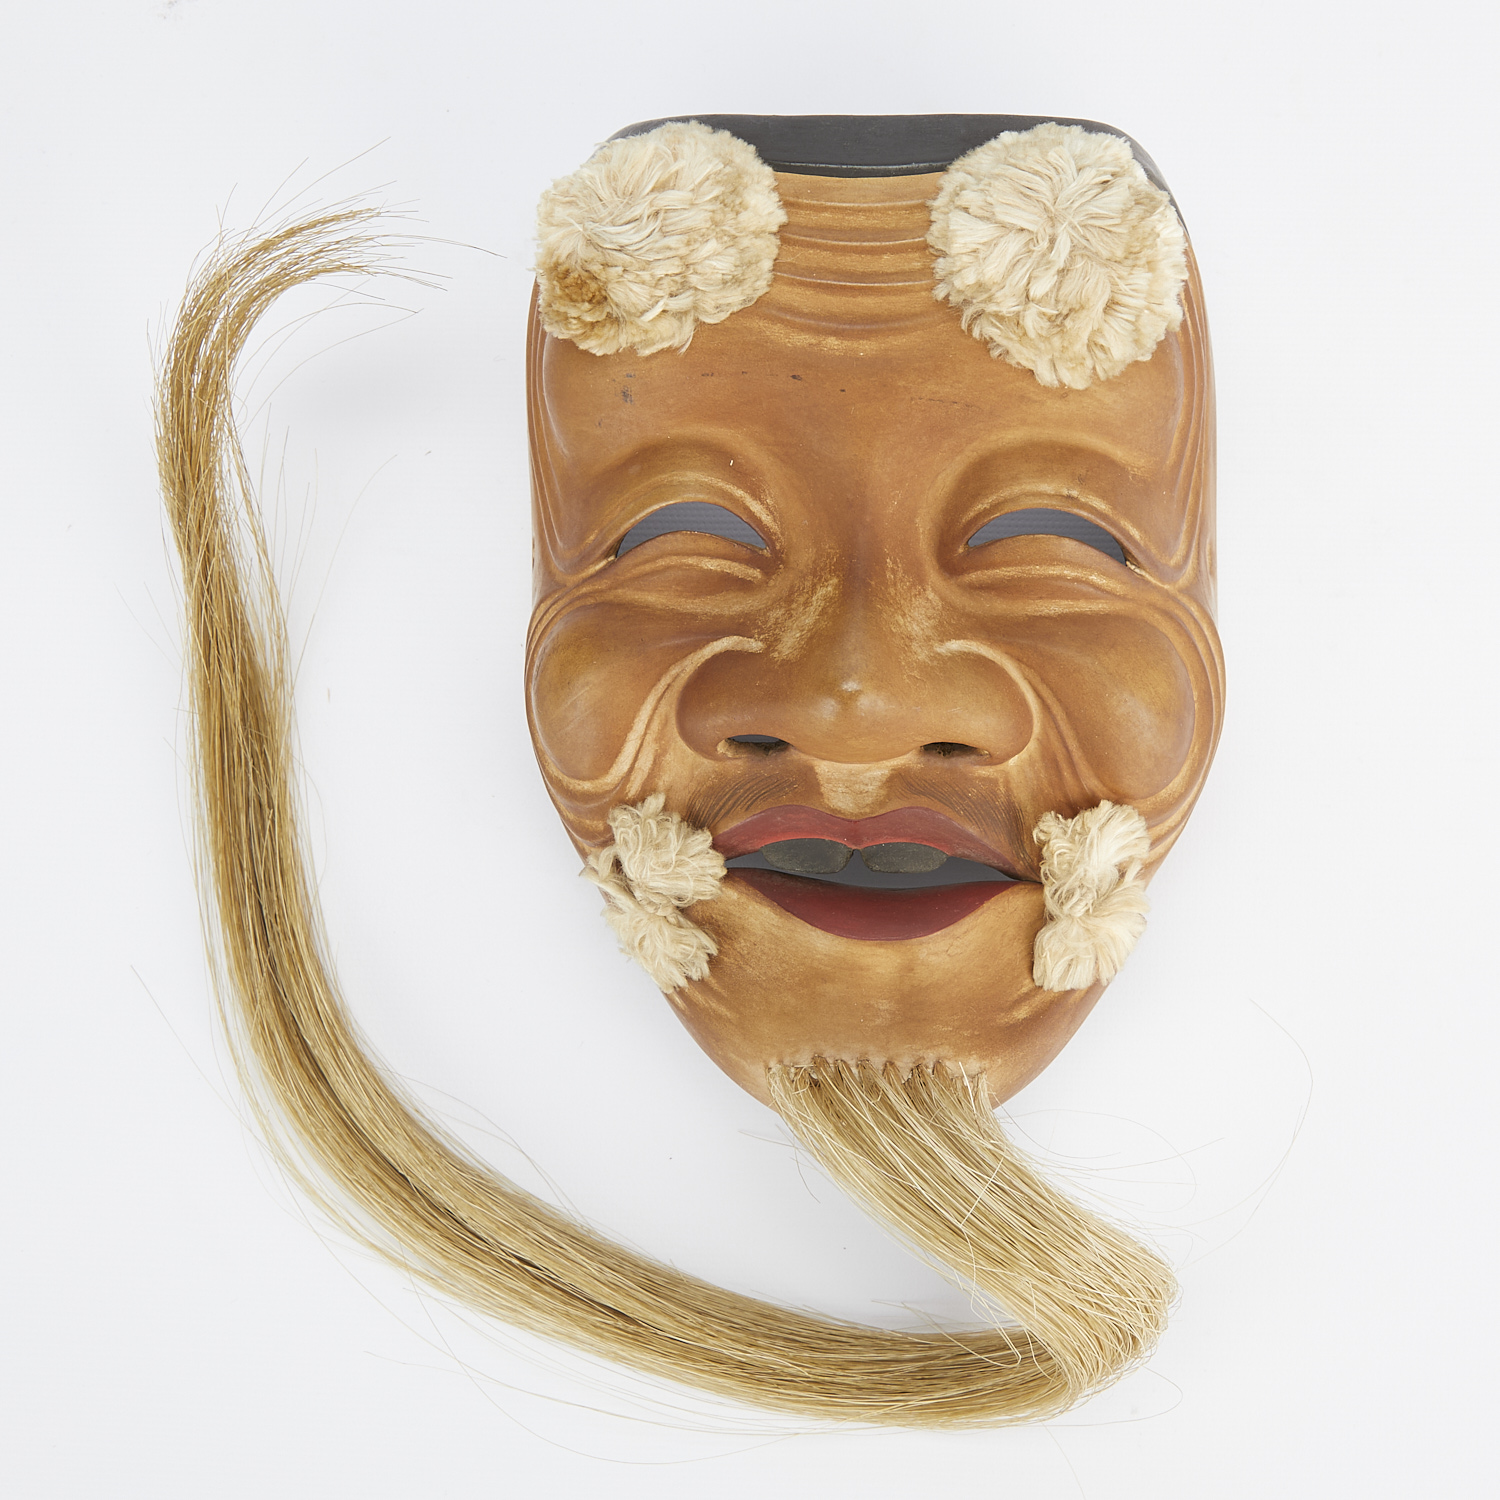 Kano Tessai Carved Wood Noh Mask - Image 5 of 15